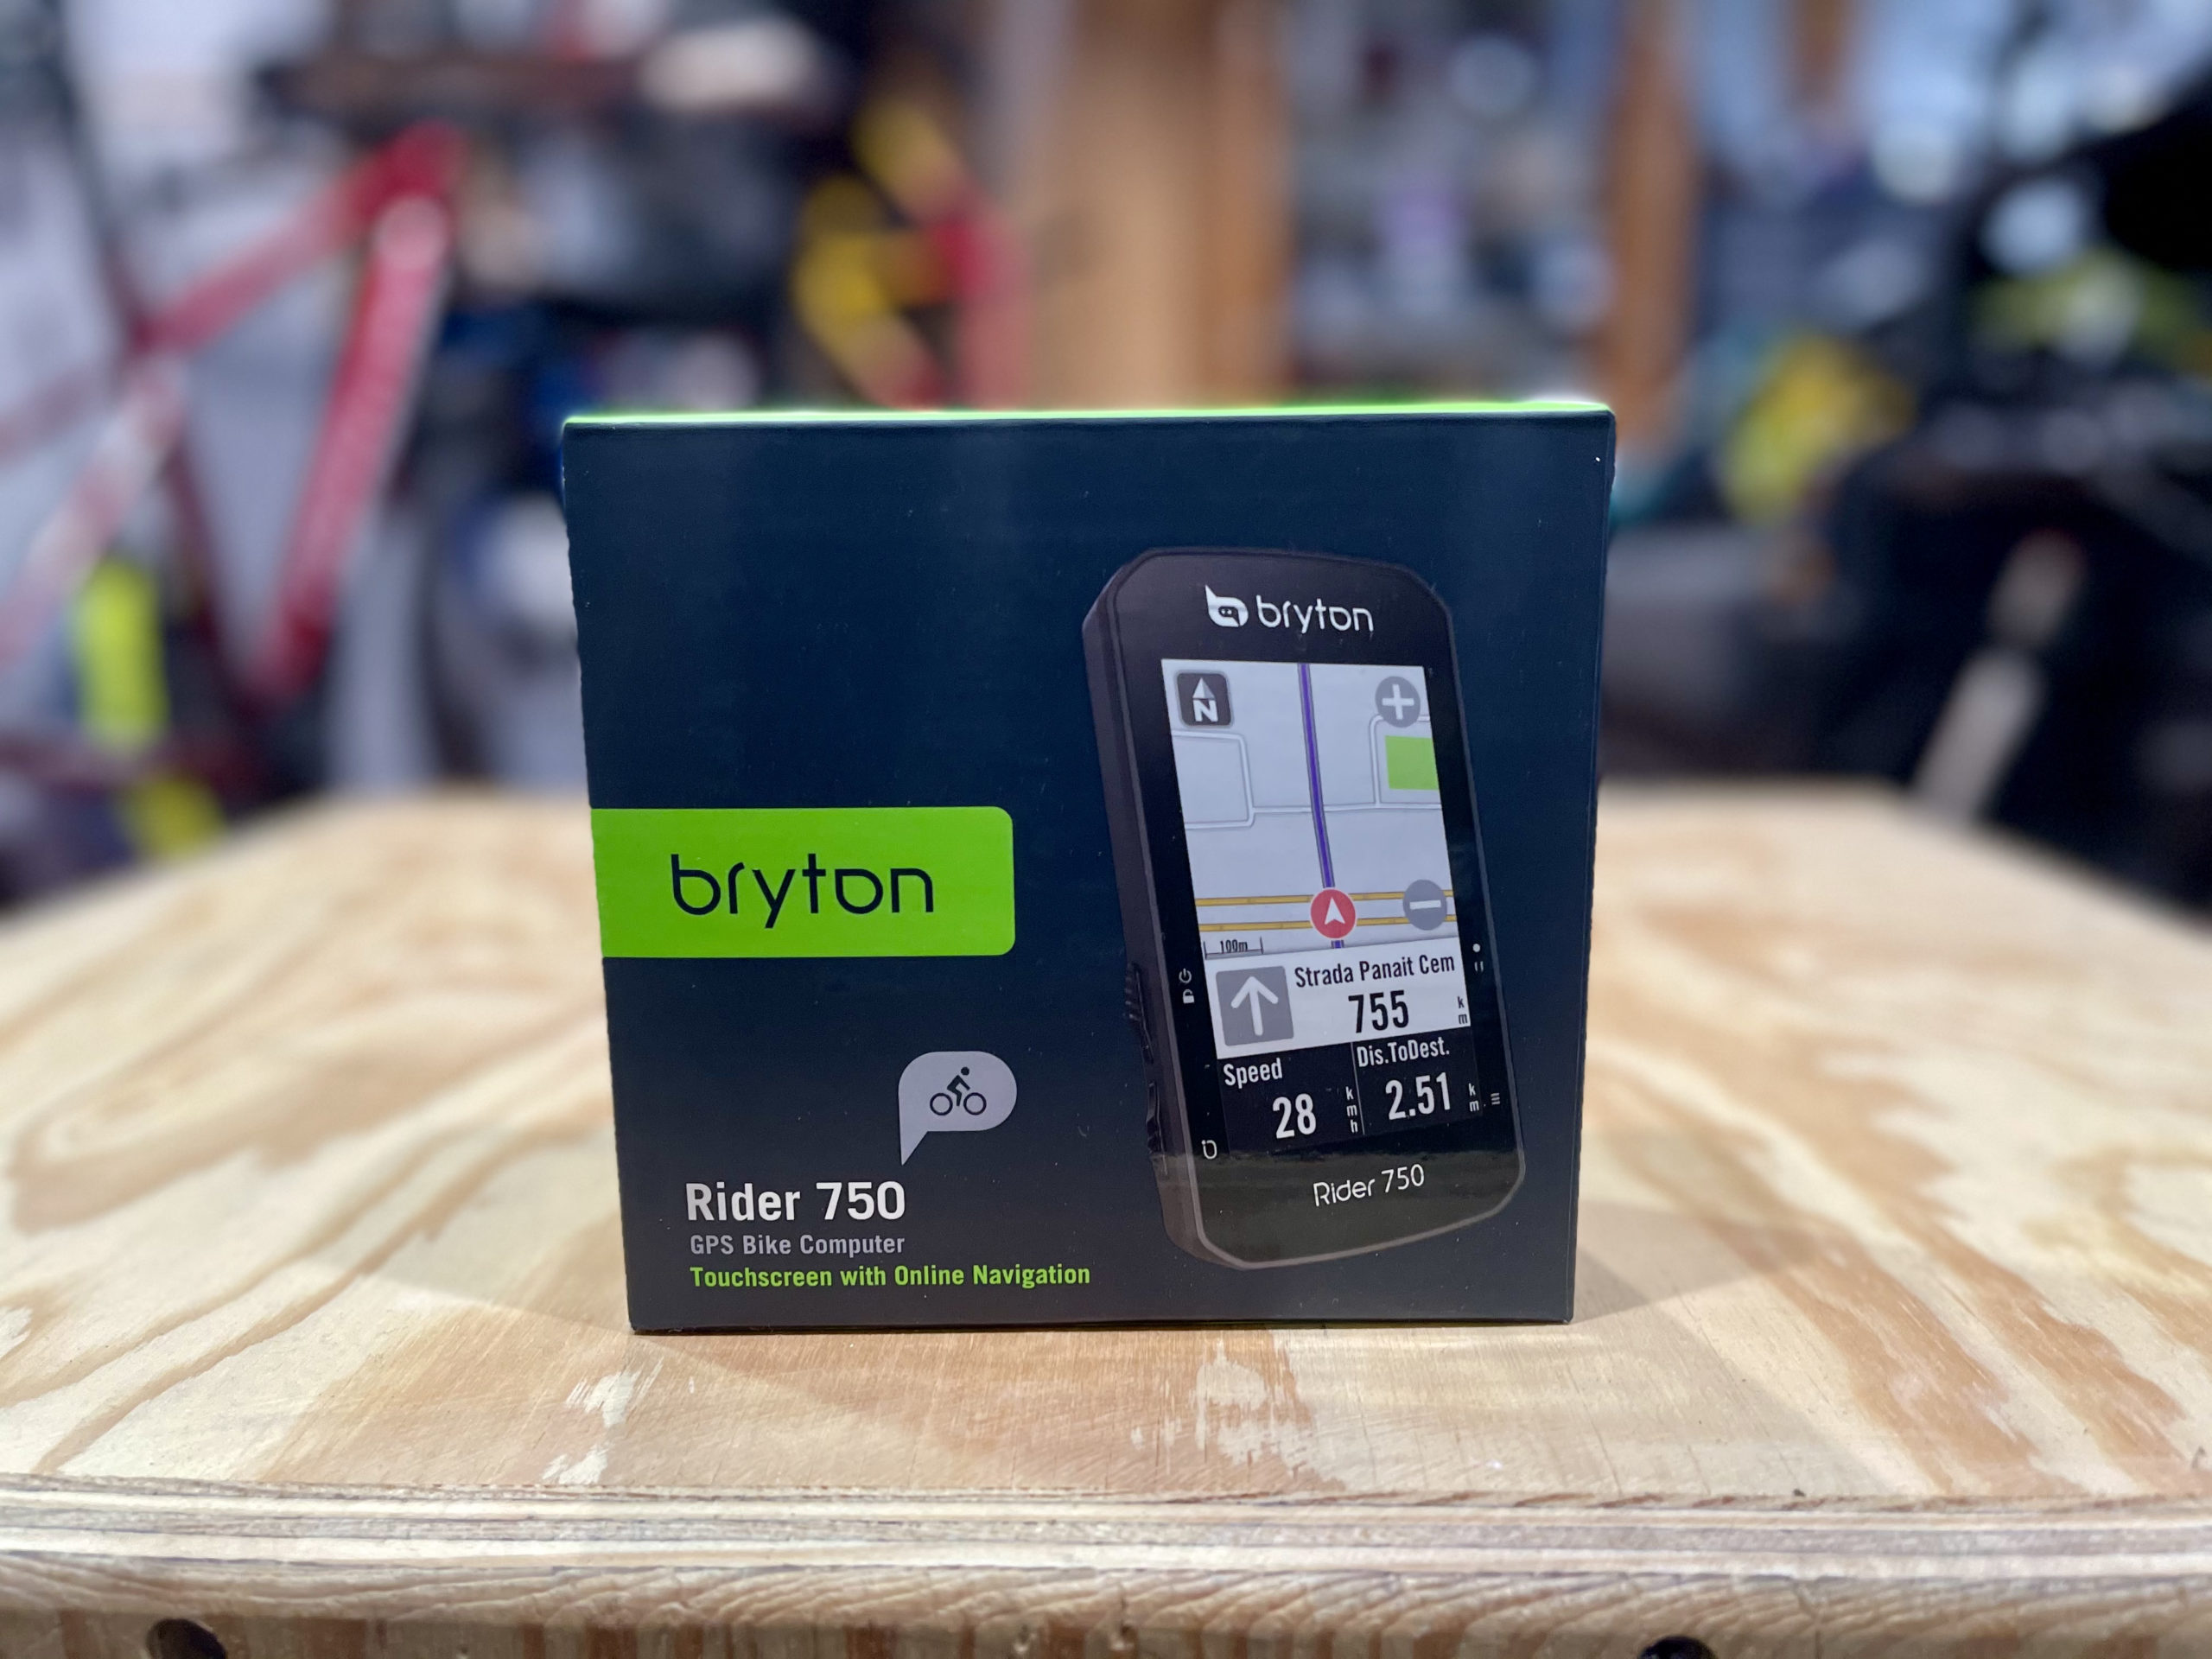 Review: Bryton's Rider 750 may be the best bang for the buck 